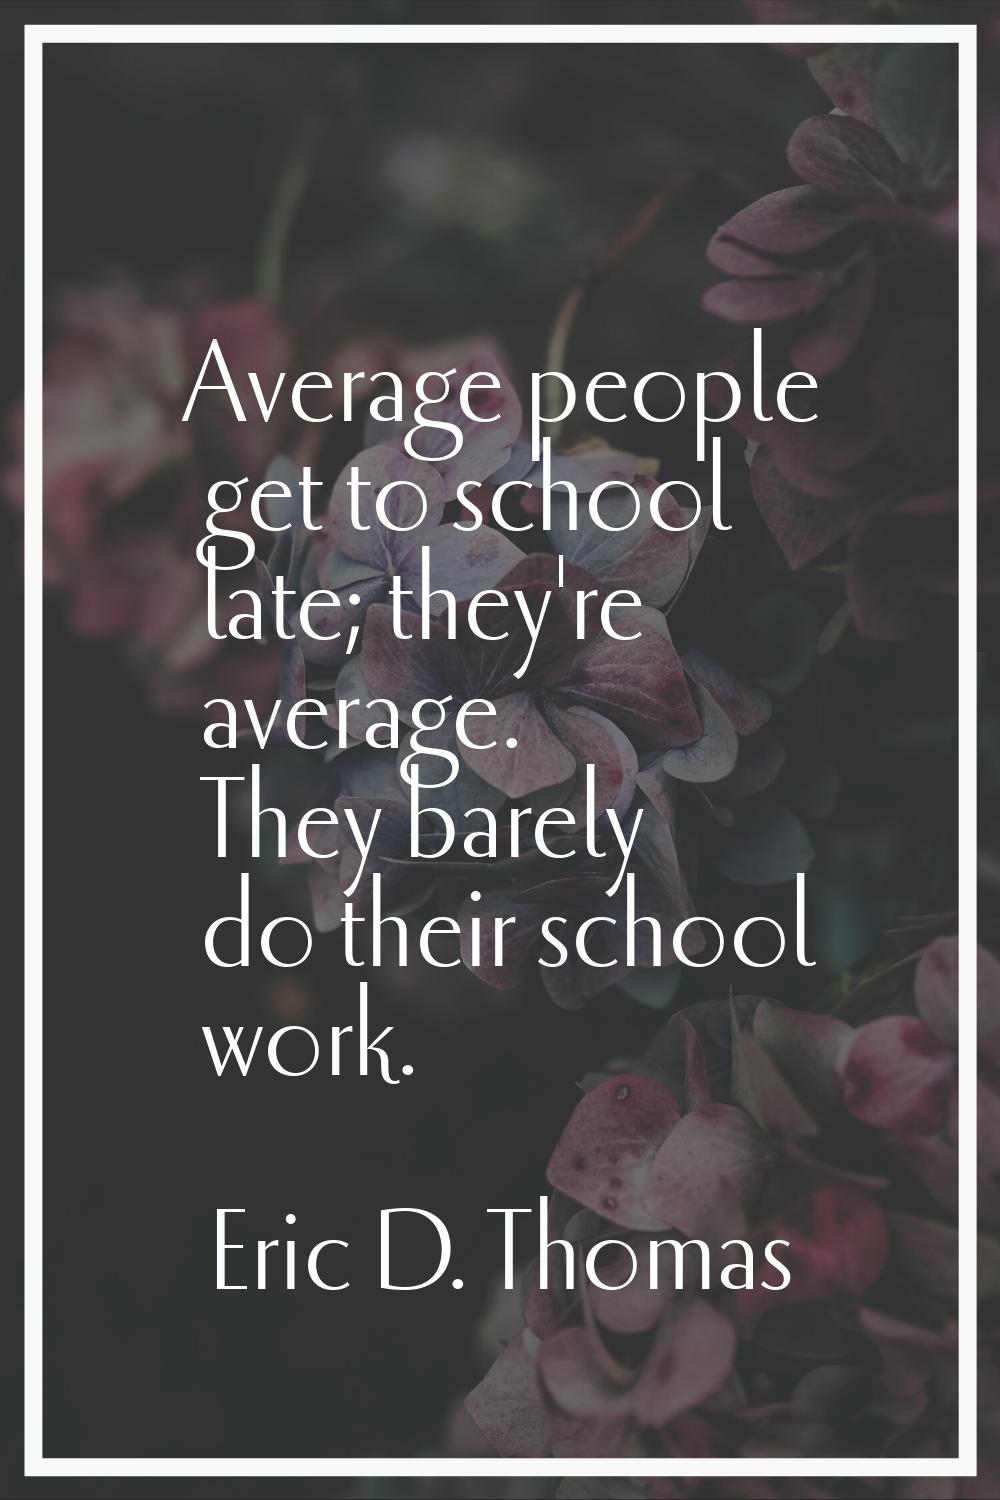 Average people get to school late; they're average. They barely do their school work.